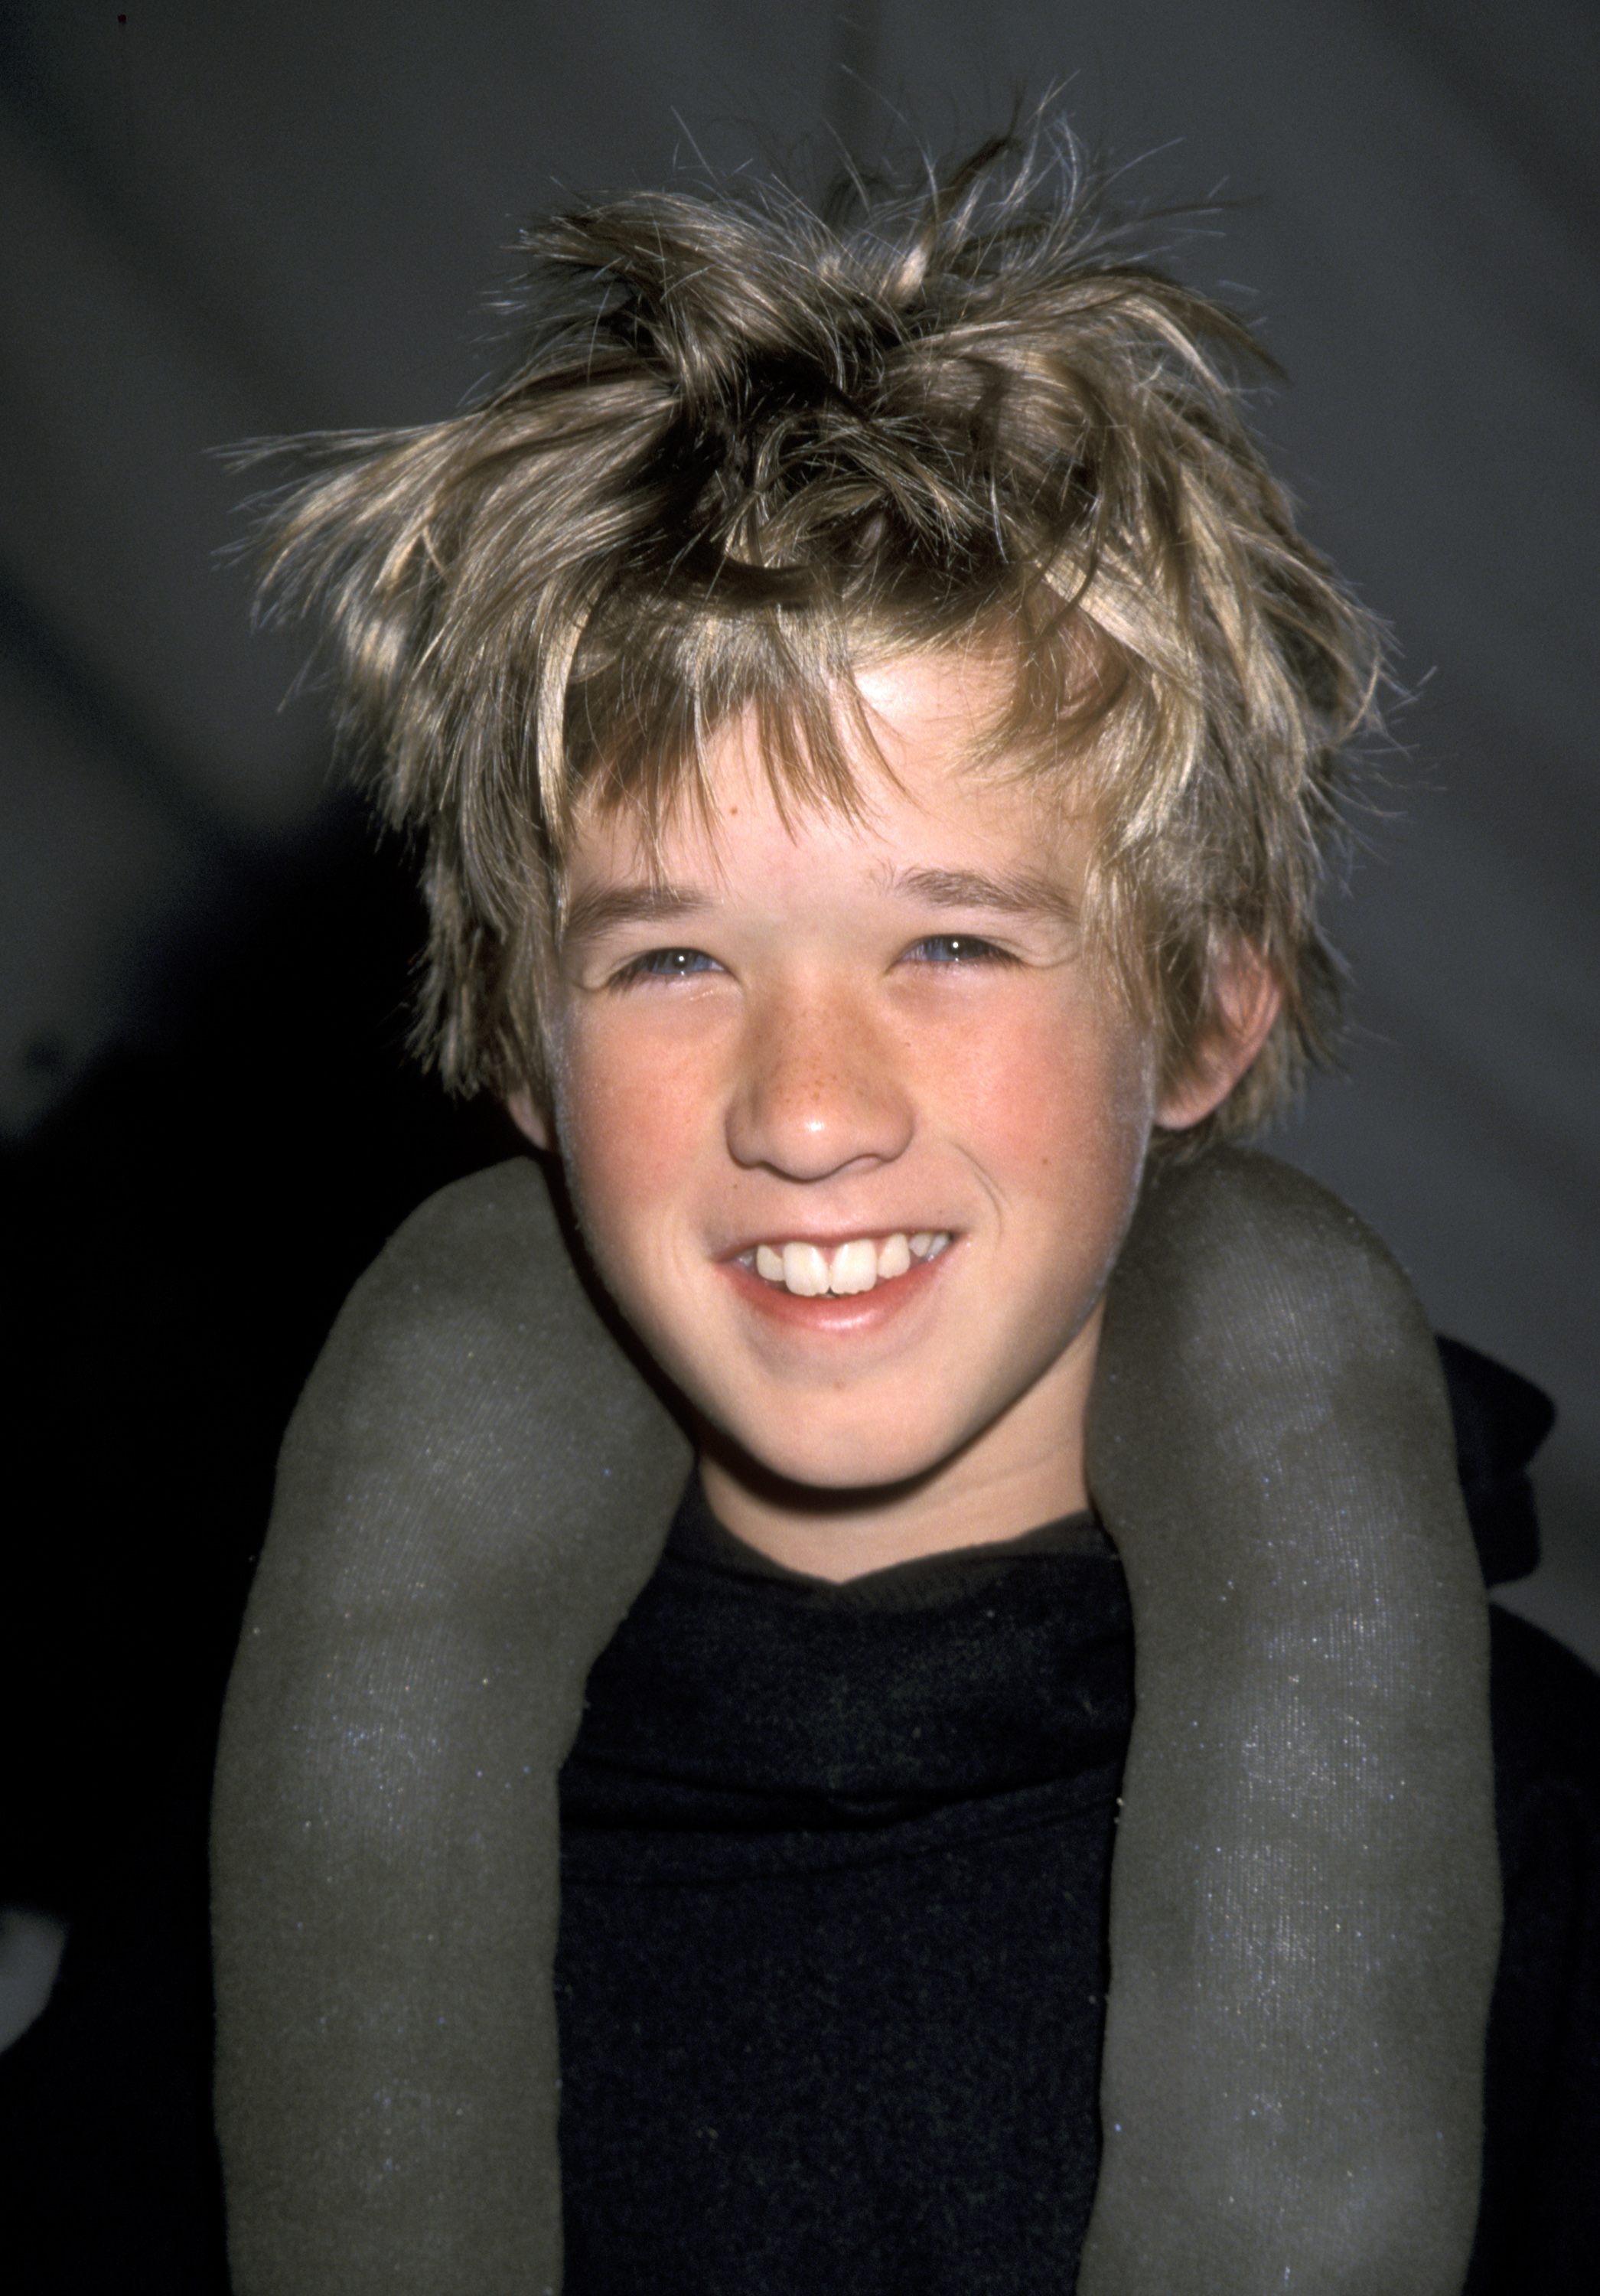 Haley Osment during 6th Annual Dream Halloween Benefit at Barker Hangar on October 30, 1999 in Santa Monica, California. | Source: Getty Images